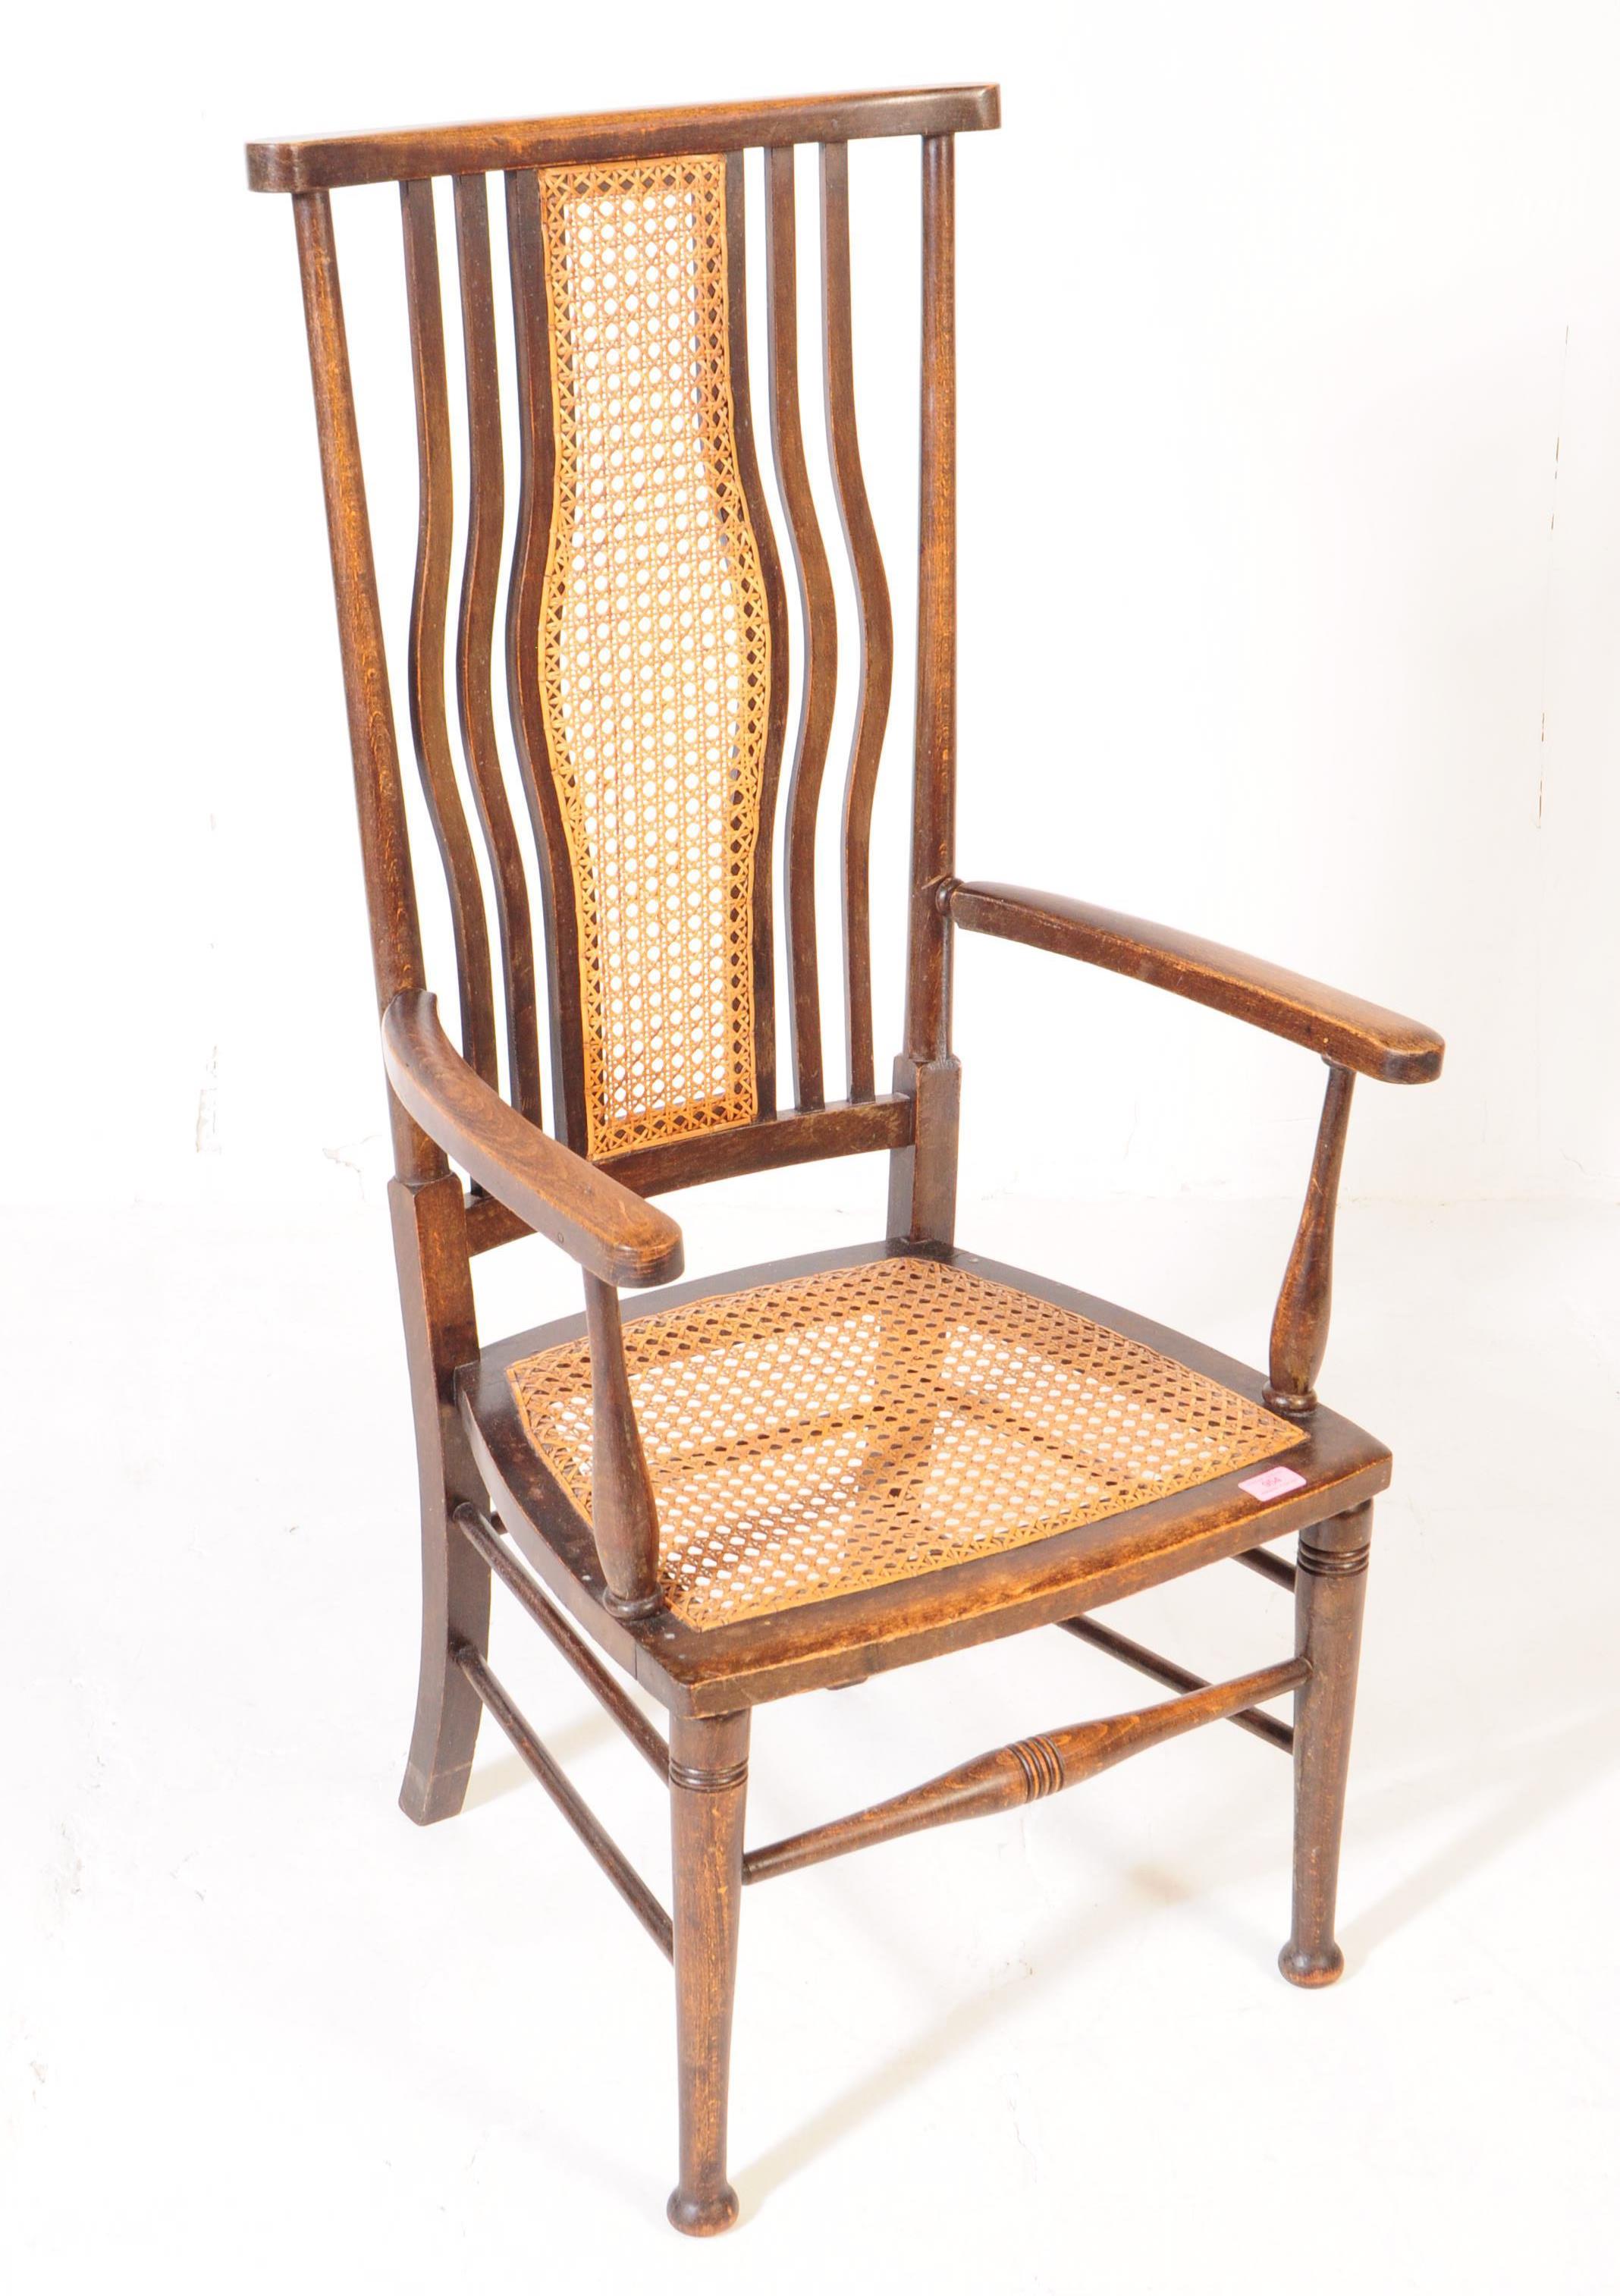 ARTS AND CRAFTS OAK & RATTAN ARMCHAIR - Image 2 of 6